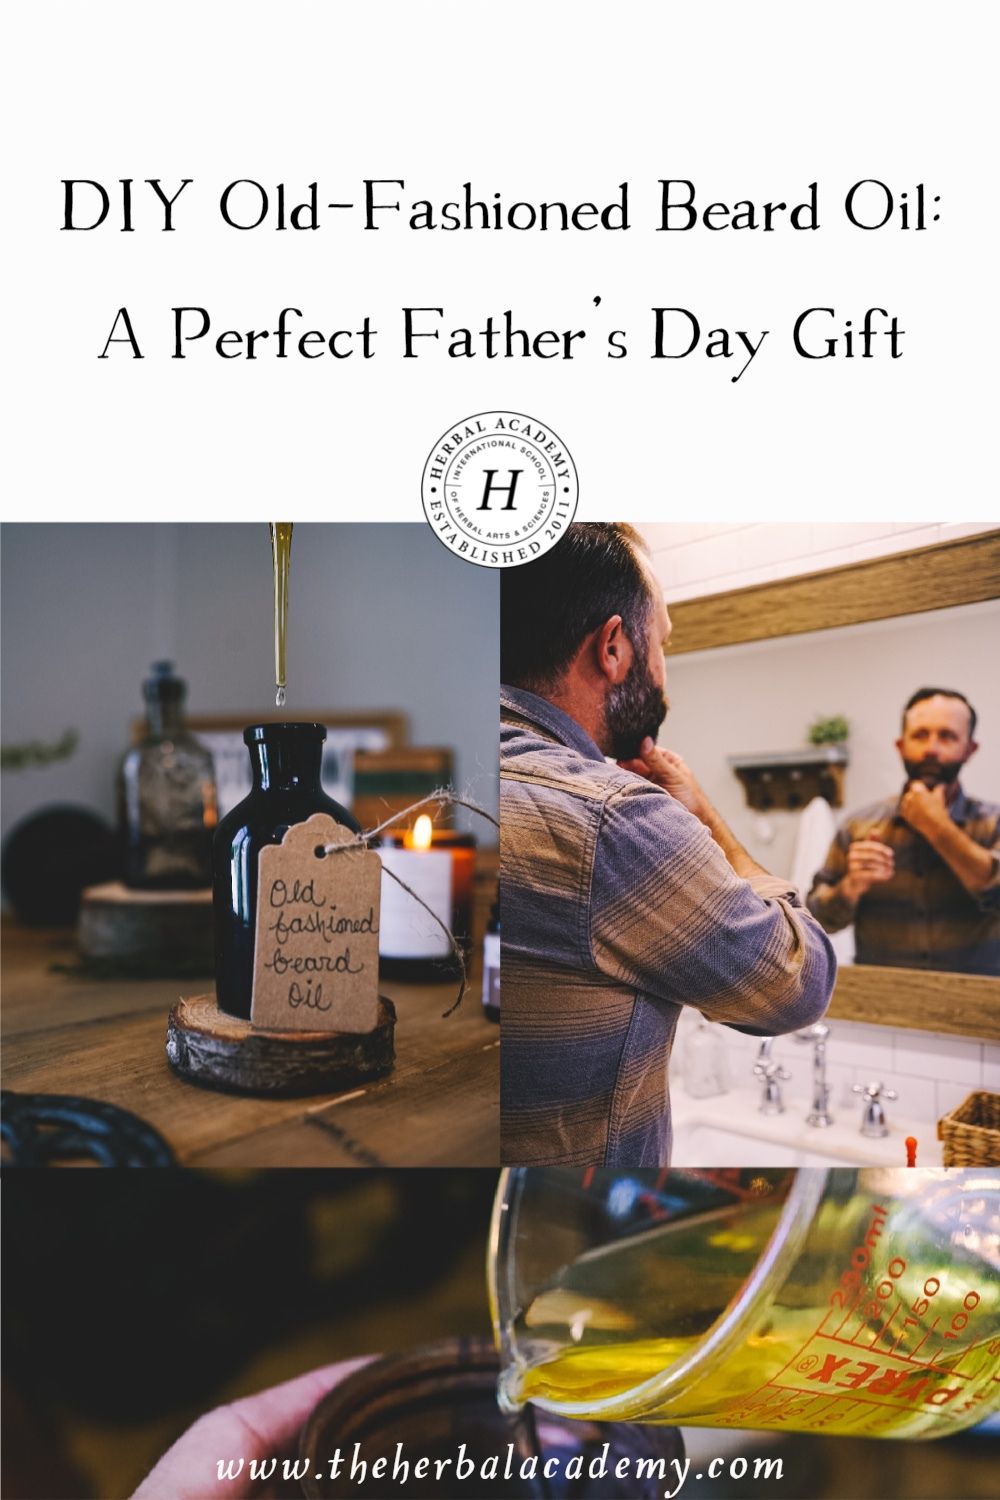 DIY Old-Fashioned Beard Oil: A Perfect Father's Day Gift | Herbal Academy | As a special thank you to the father figure(s) in your life, craft this old-fashioned beard oil for a perfect Father’s Day gift.